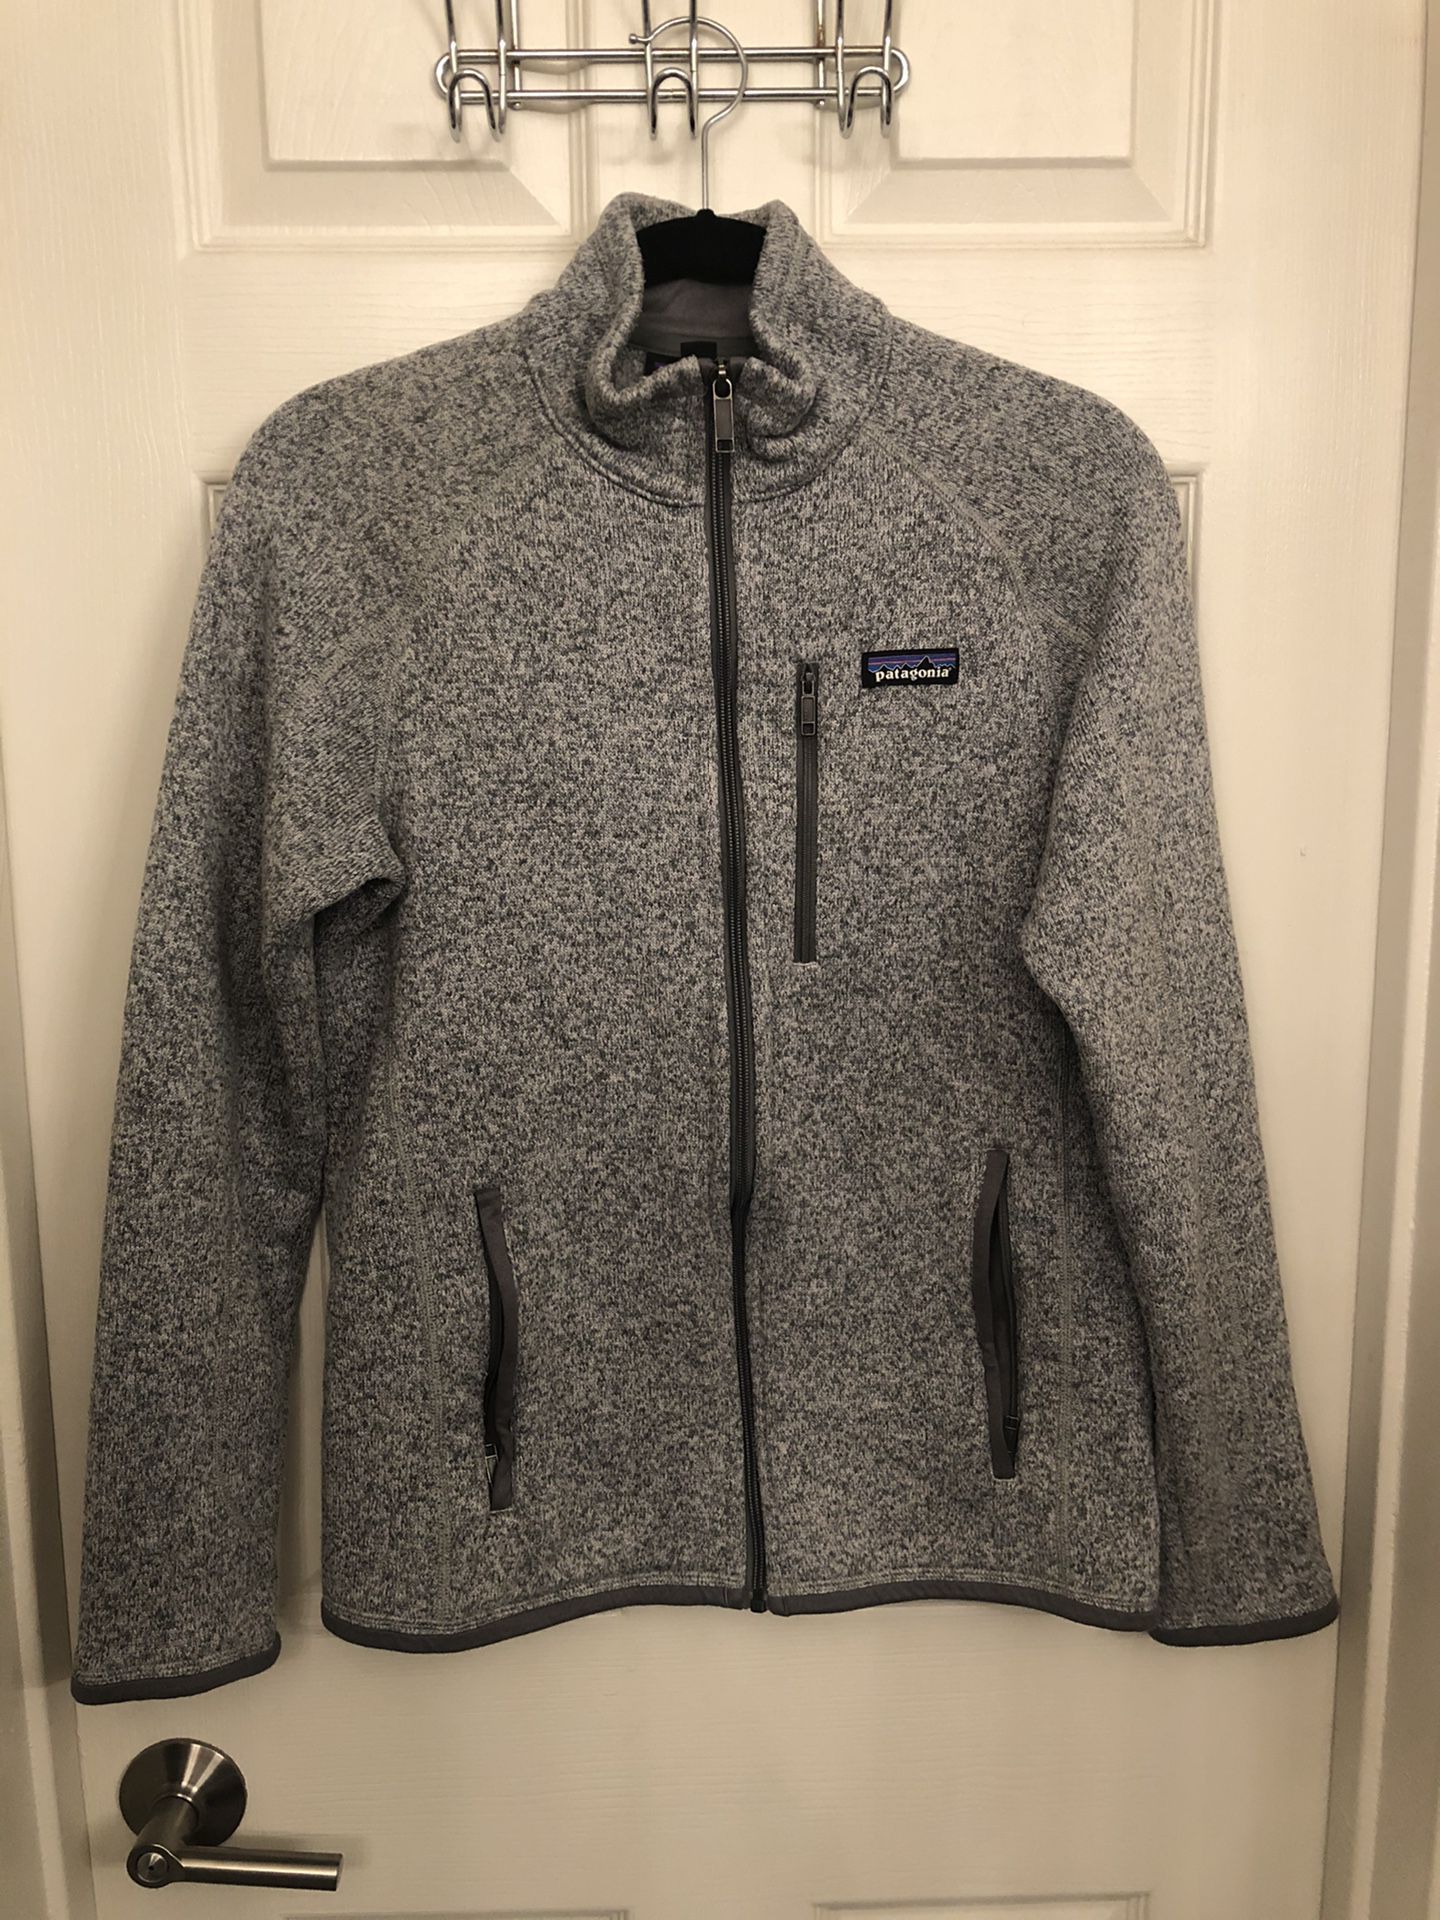 Patagonia Better Sweater Men’s Size Small